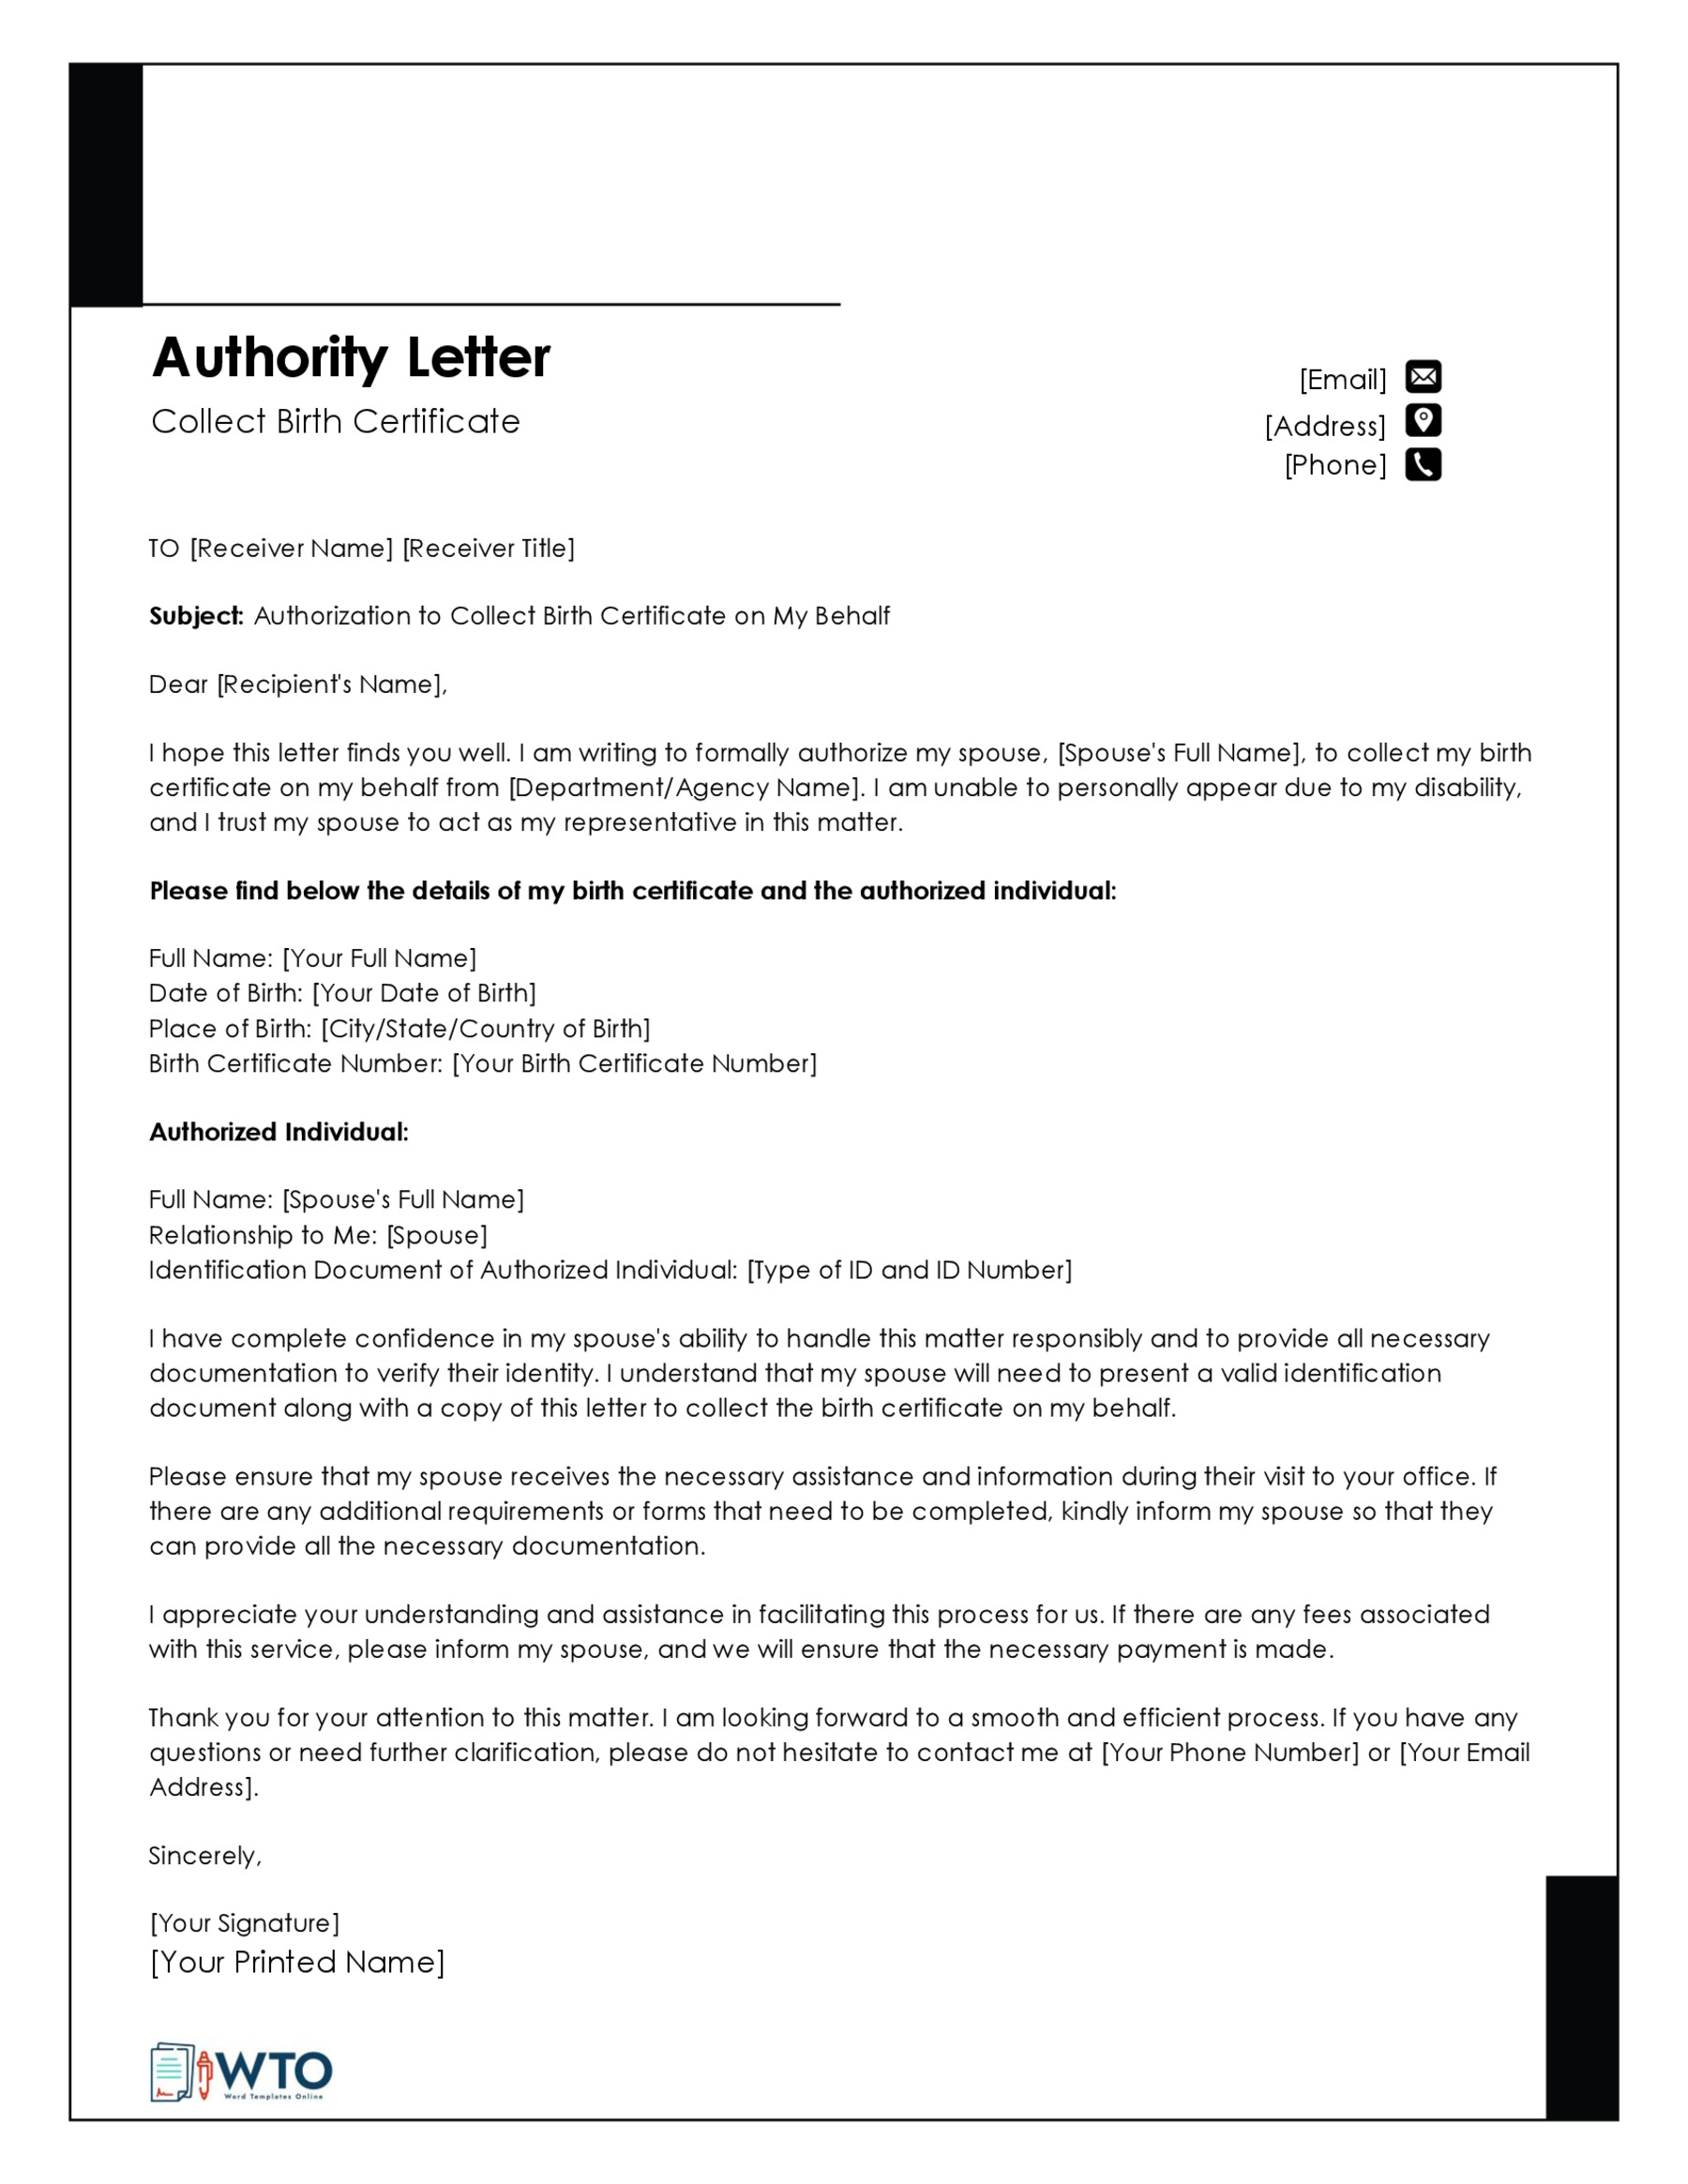 Authorization Letter for Claiming Birth Certificate Template-Downloadable word format